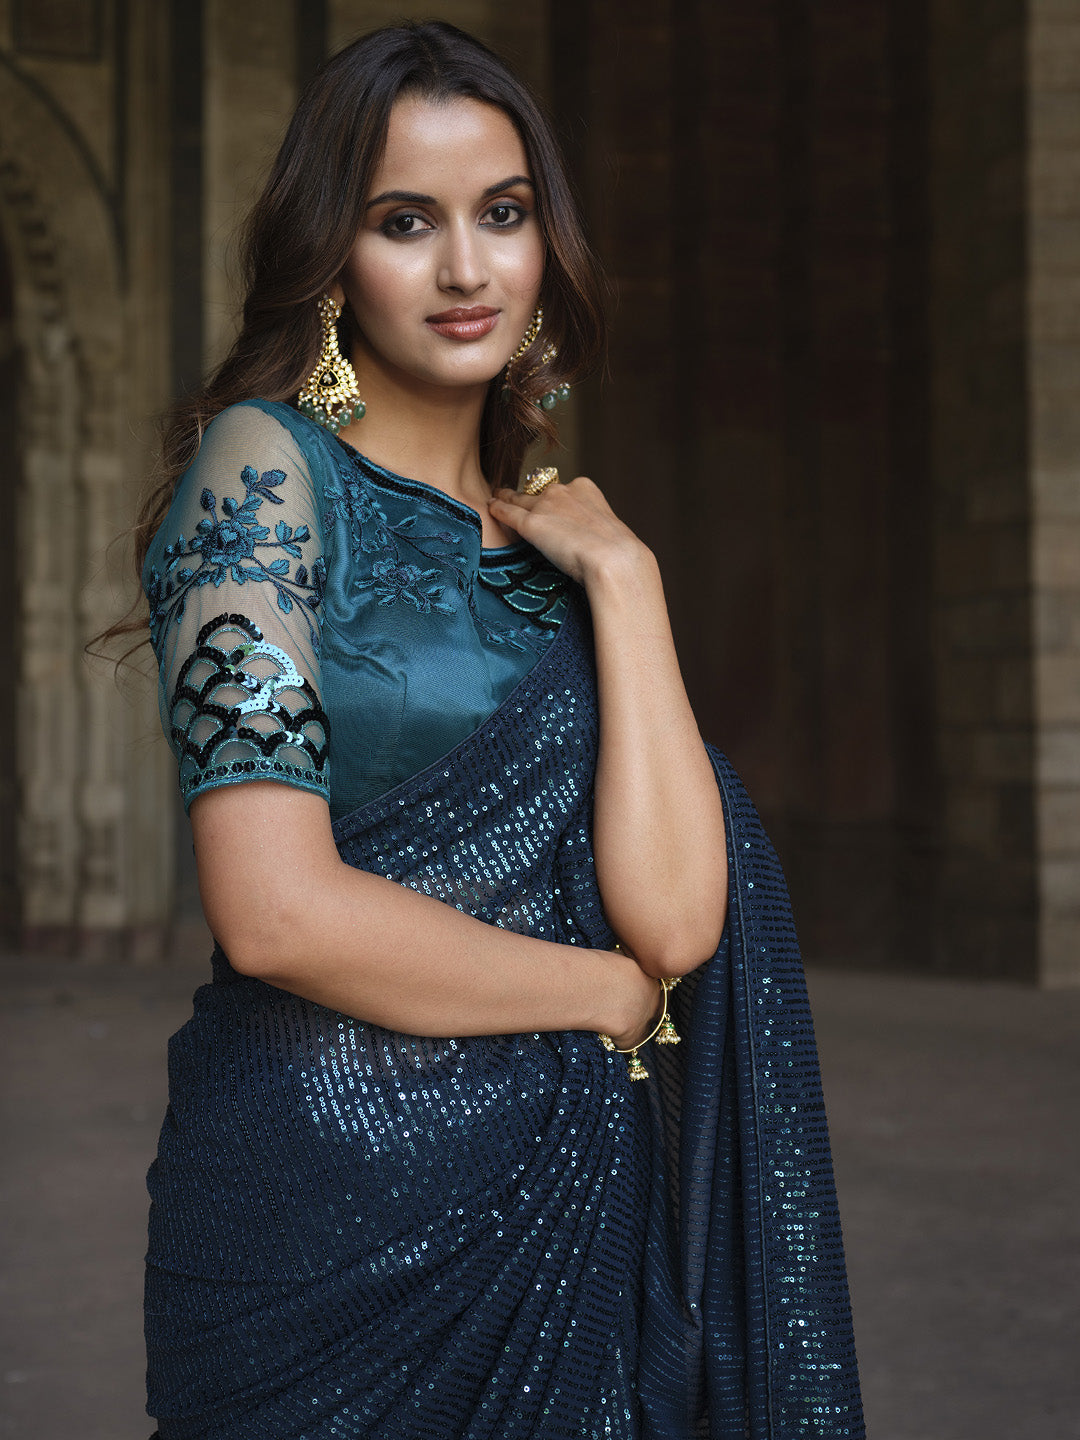 Gorgeous Teal Blue Sequin Embroidery Saree